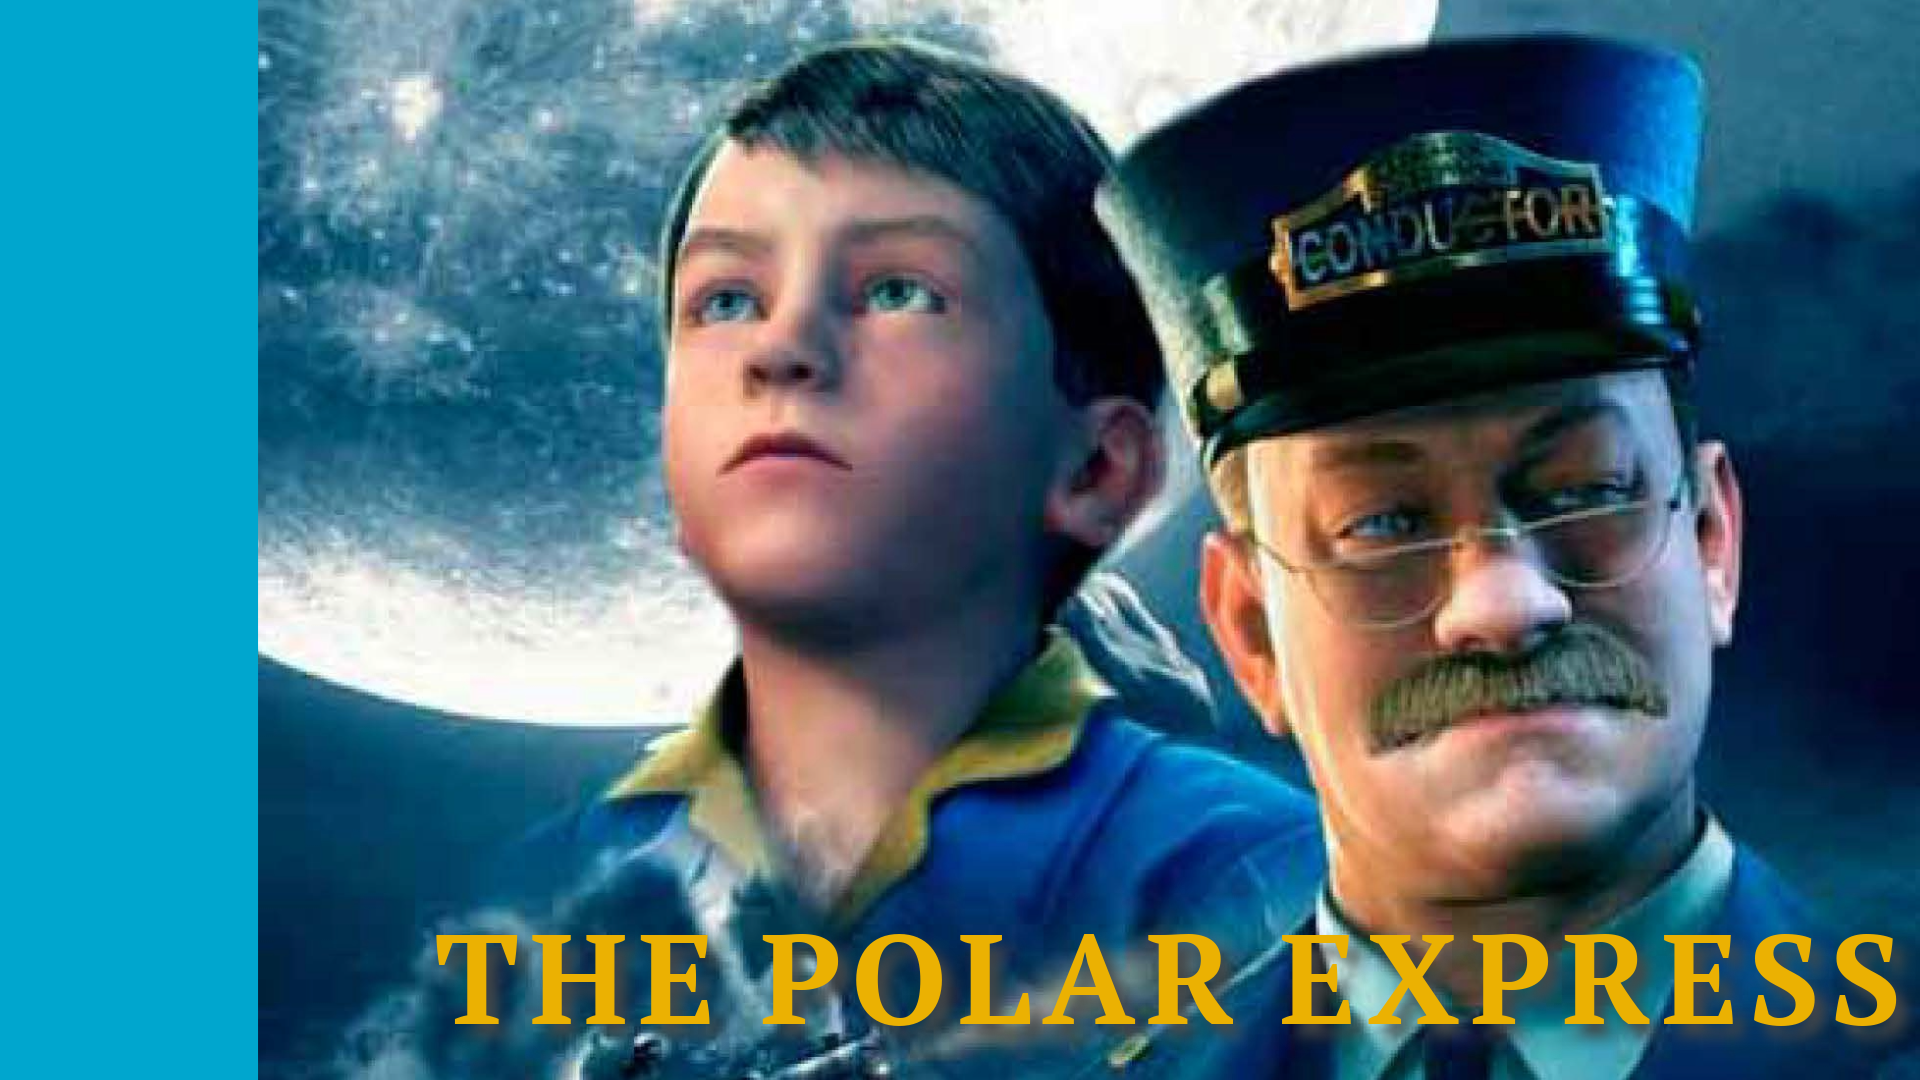 The Polar Express - Spruce Peak Performing Arts Center in Stowe, VT